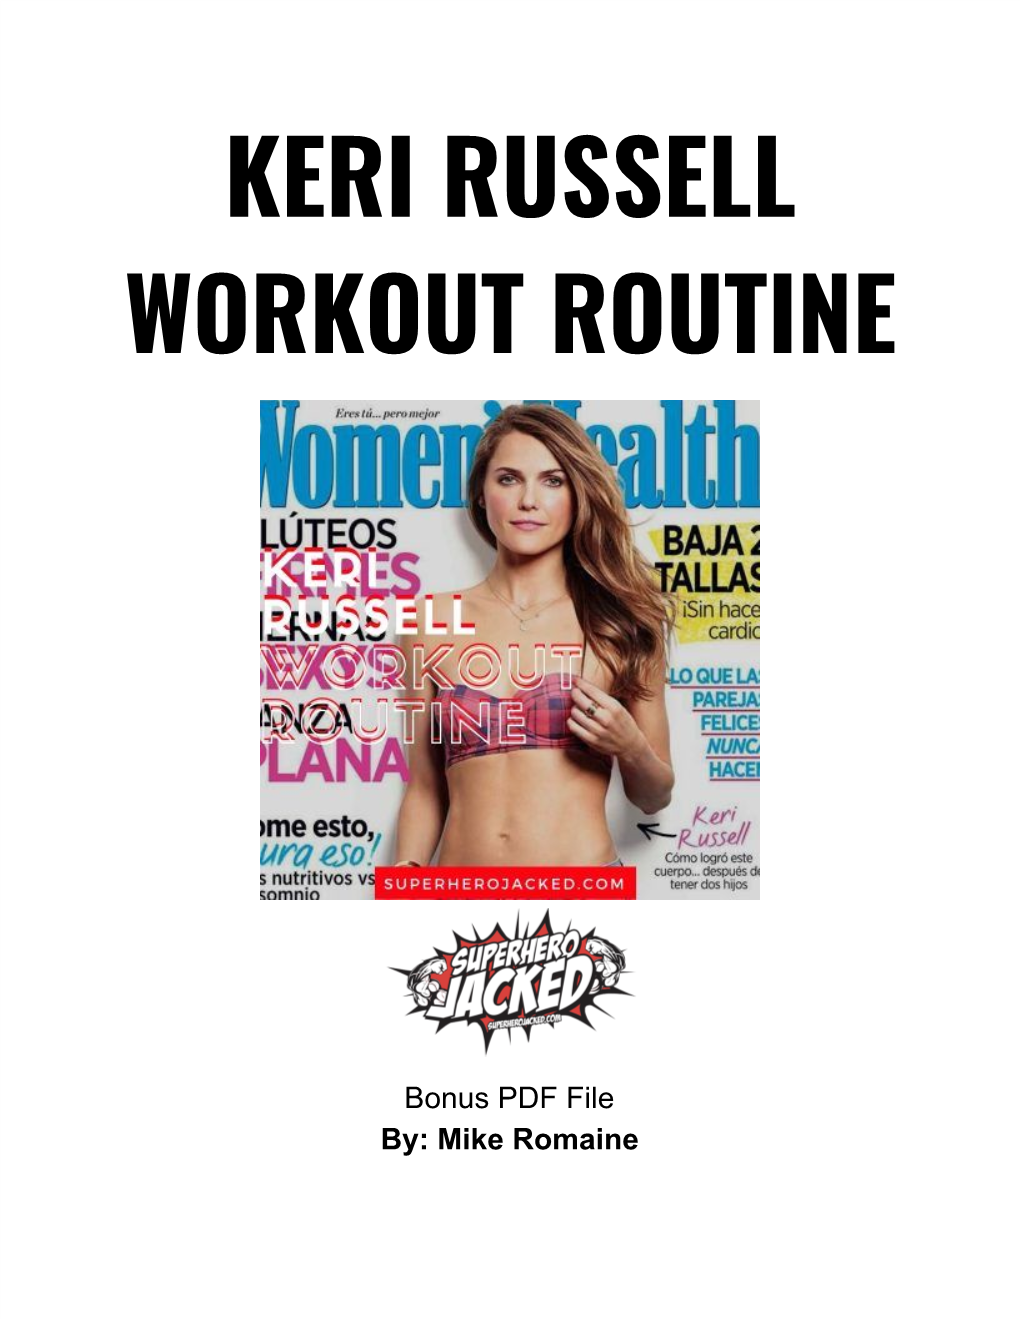 Keri Russell Workout Routine